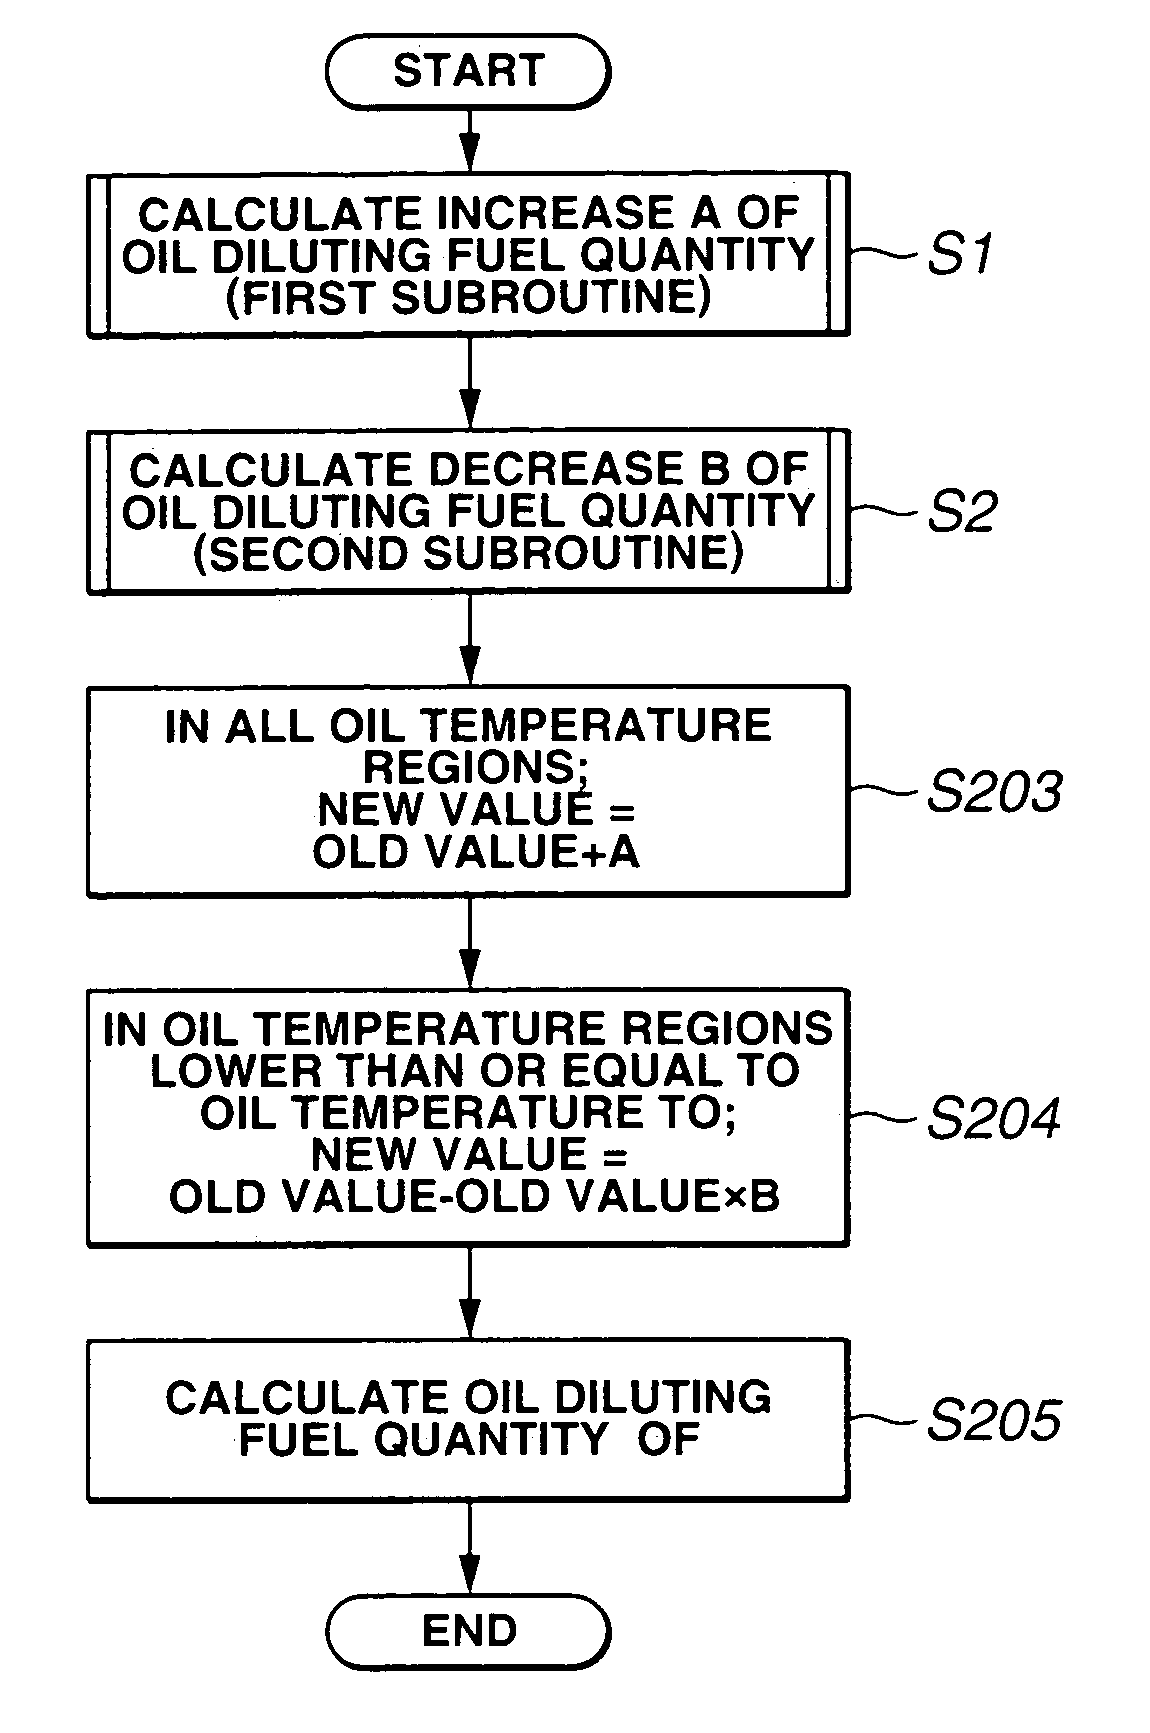 Estimation of oil-diluting fuel quantity of engine